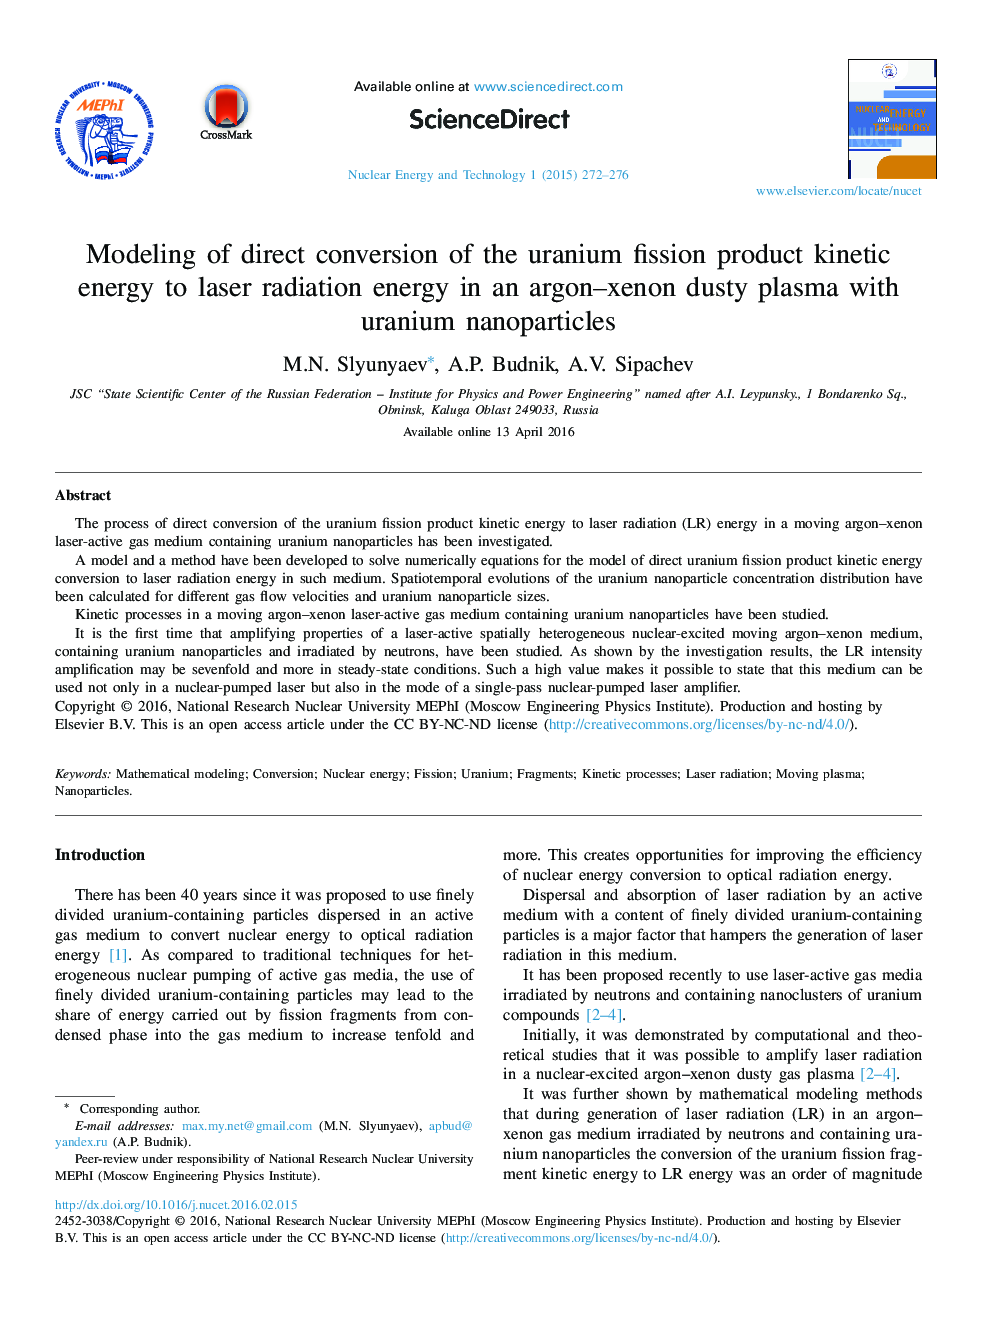 Modeling of direct conversion of the uranium fission product kinetic energy to laser radiation energy in an argon–xenon dusty plasma with uranium nanoparticles